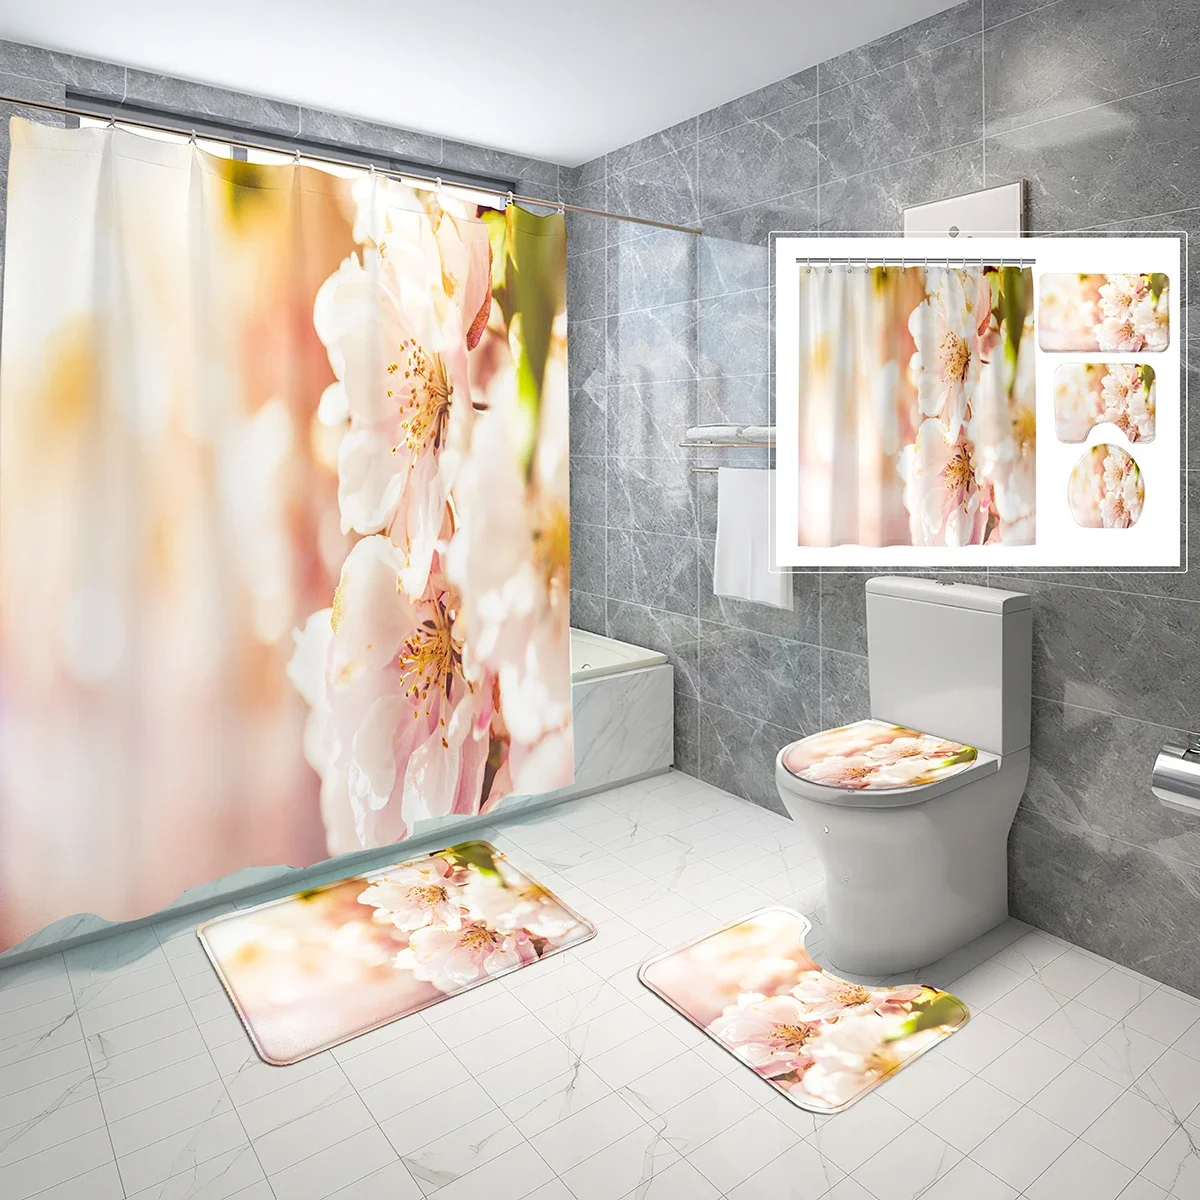 

Peach Blossom Shower Curtain Sets 4 Pcs with Non-Slip Rugs Mat Toilet Lid Spring Branch Flower Waterproof Shower Curtain Set